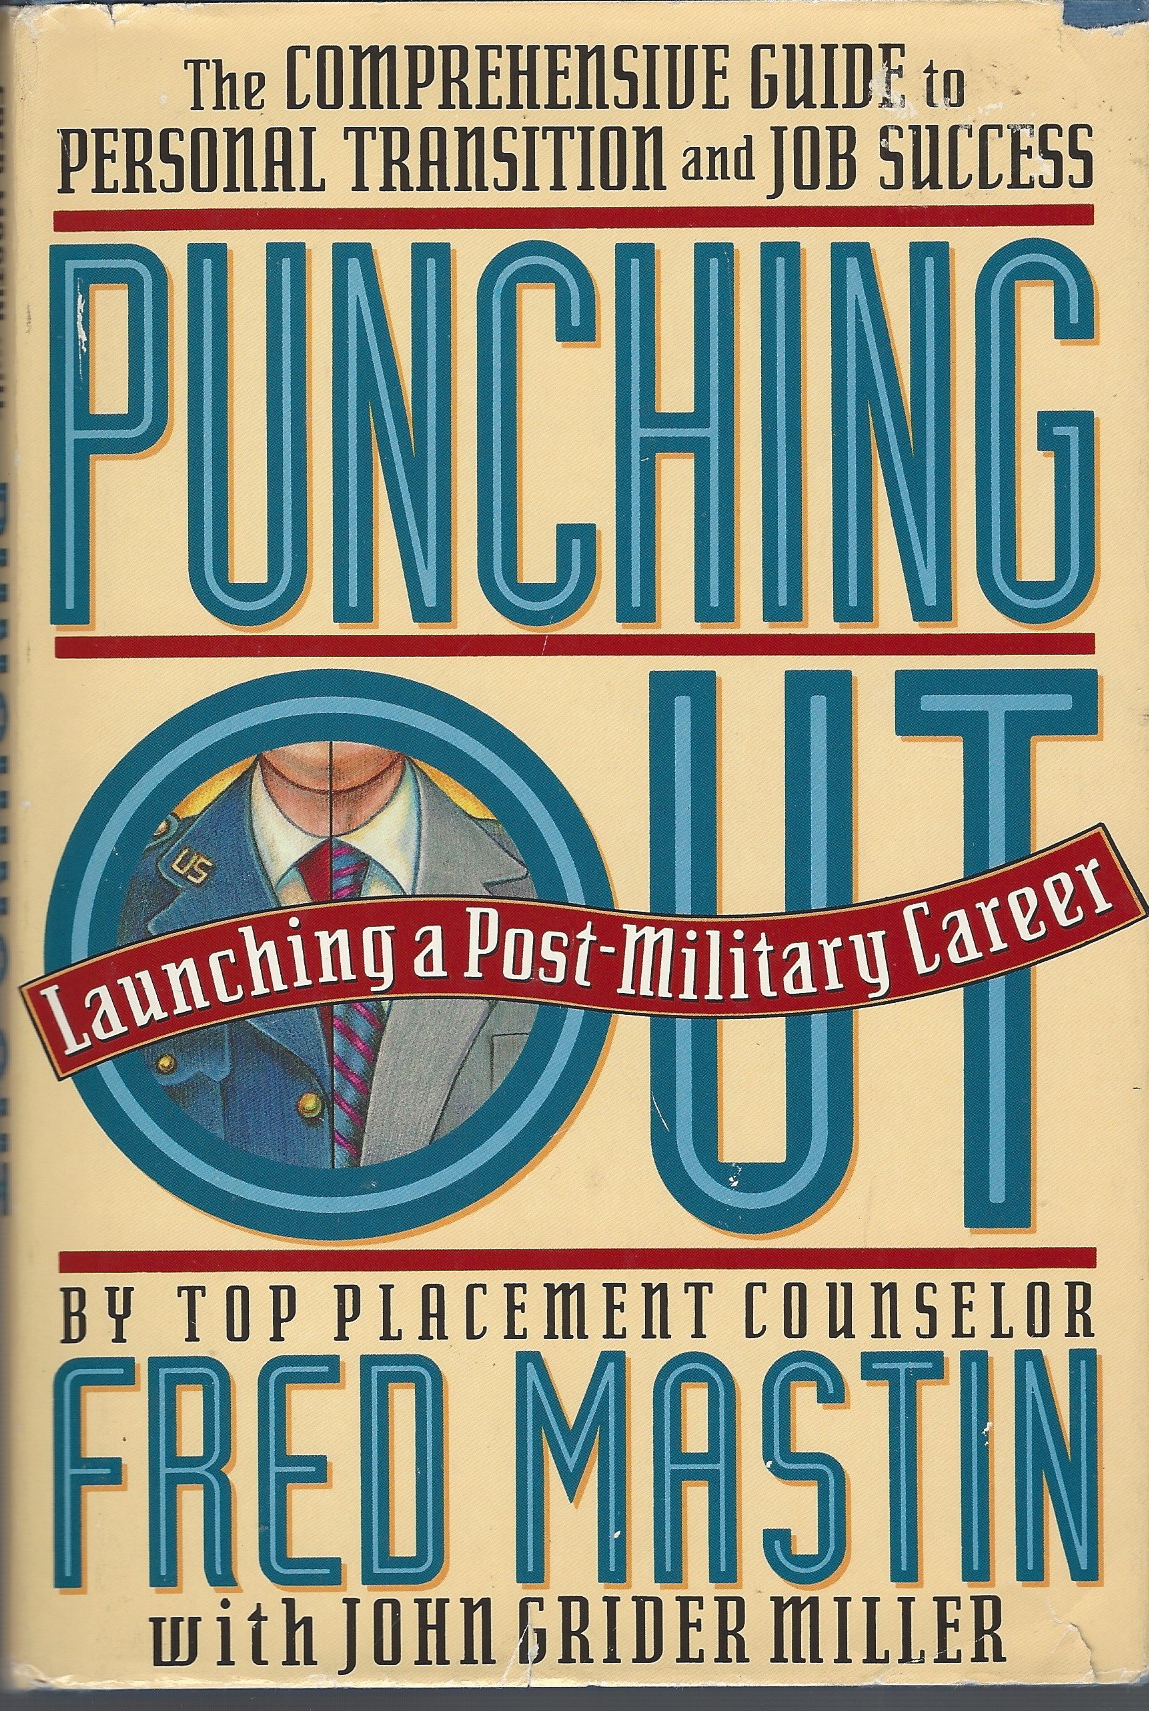 MASTIN FRED / MILLER GRIDER JOHN - Punching out: Launching a Post-Military Career the Comprehensive Guide to Personal Transition Job Success